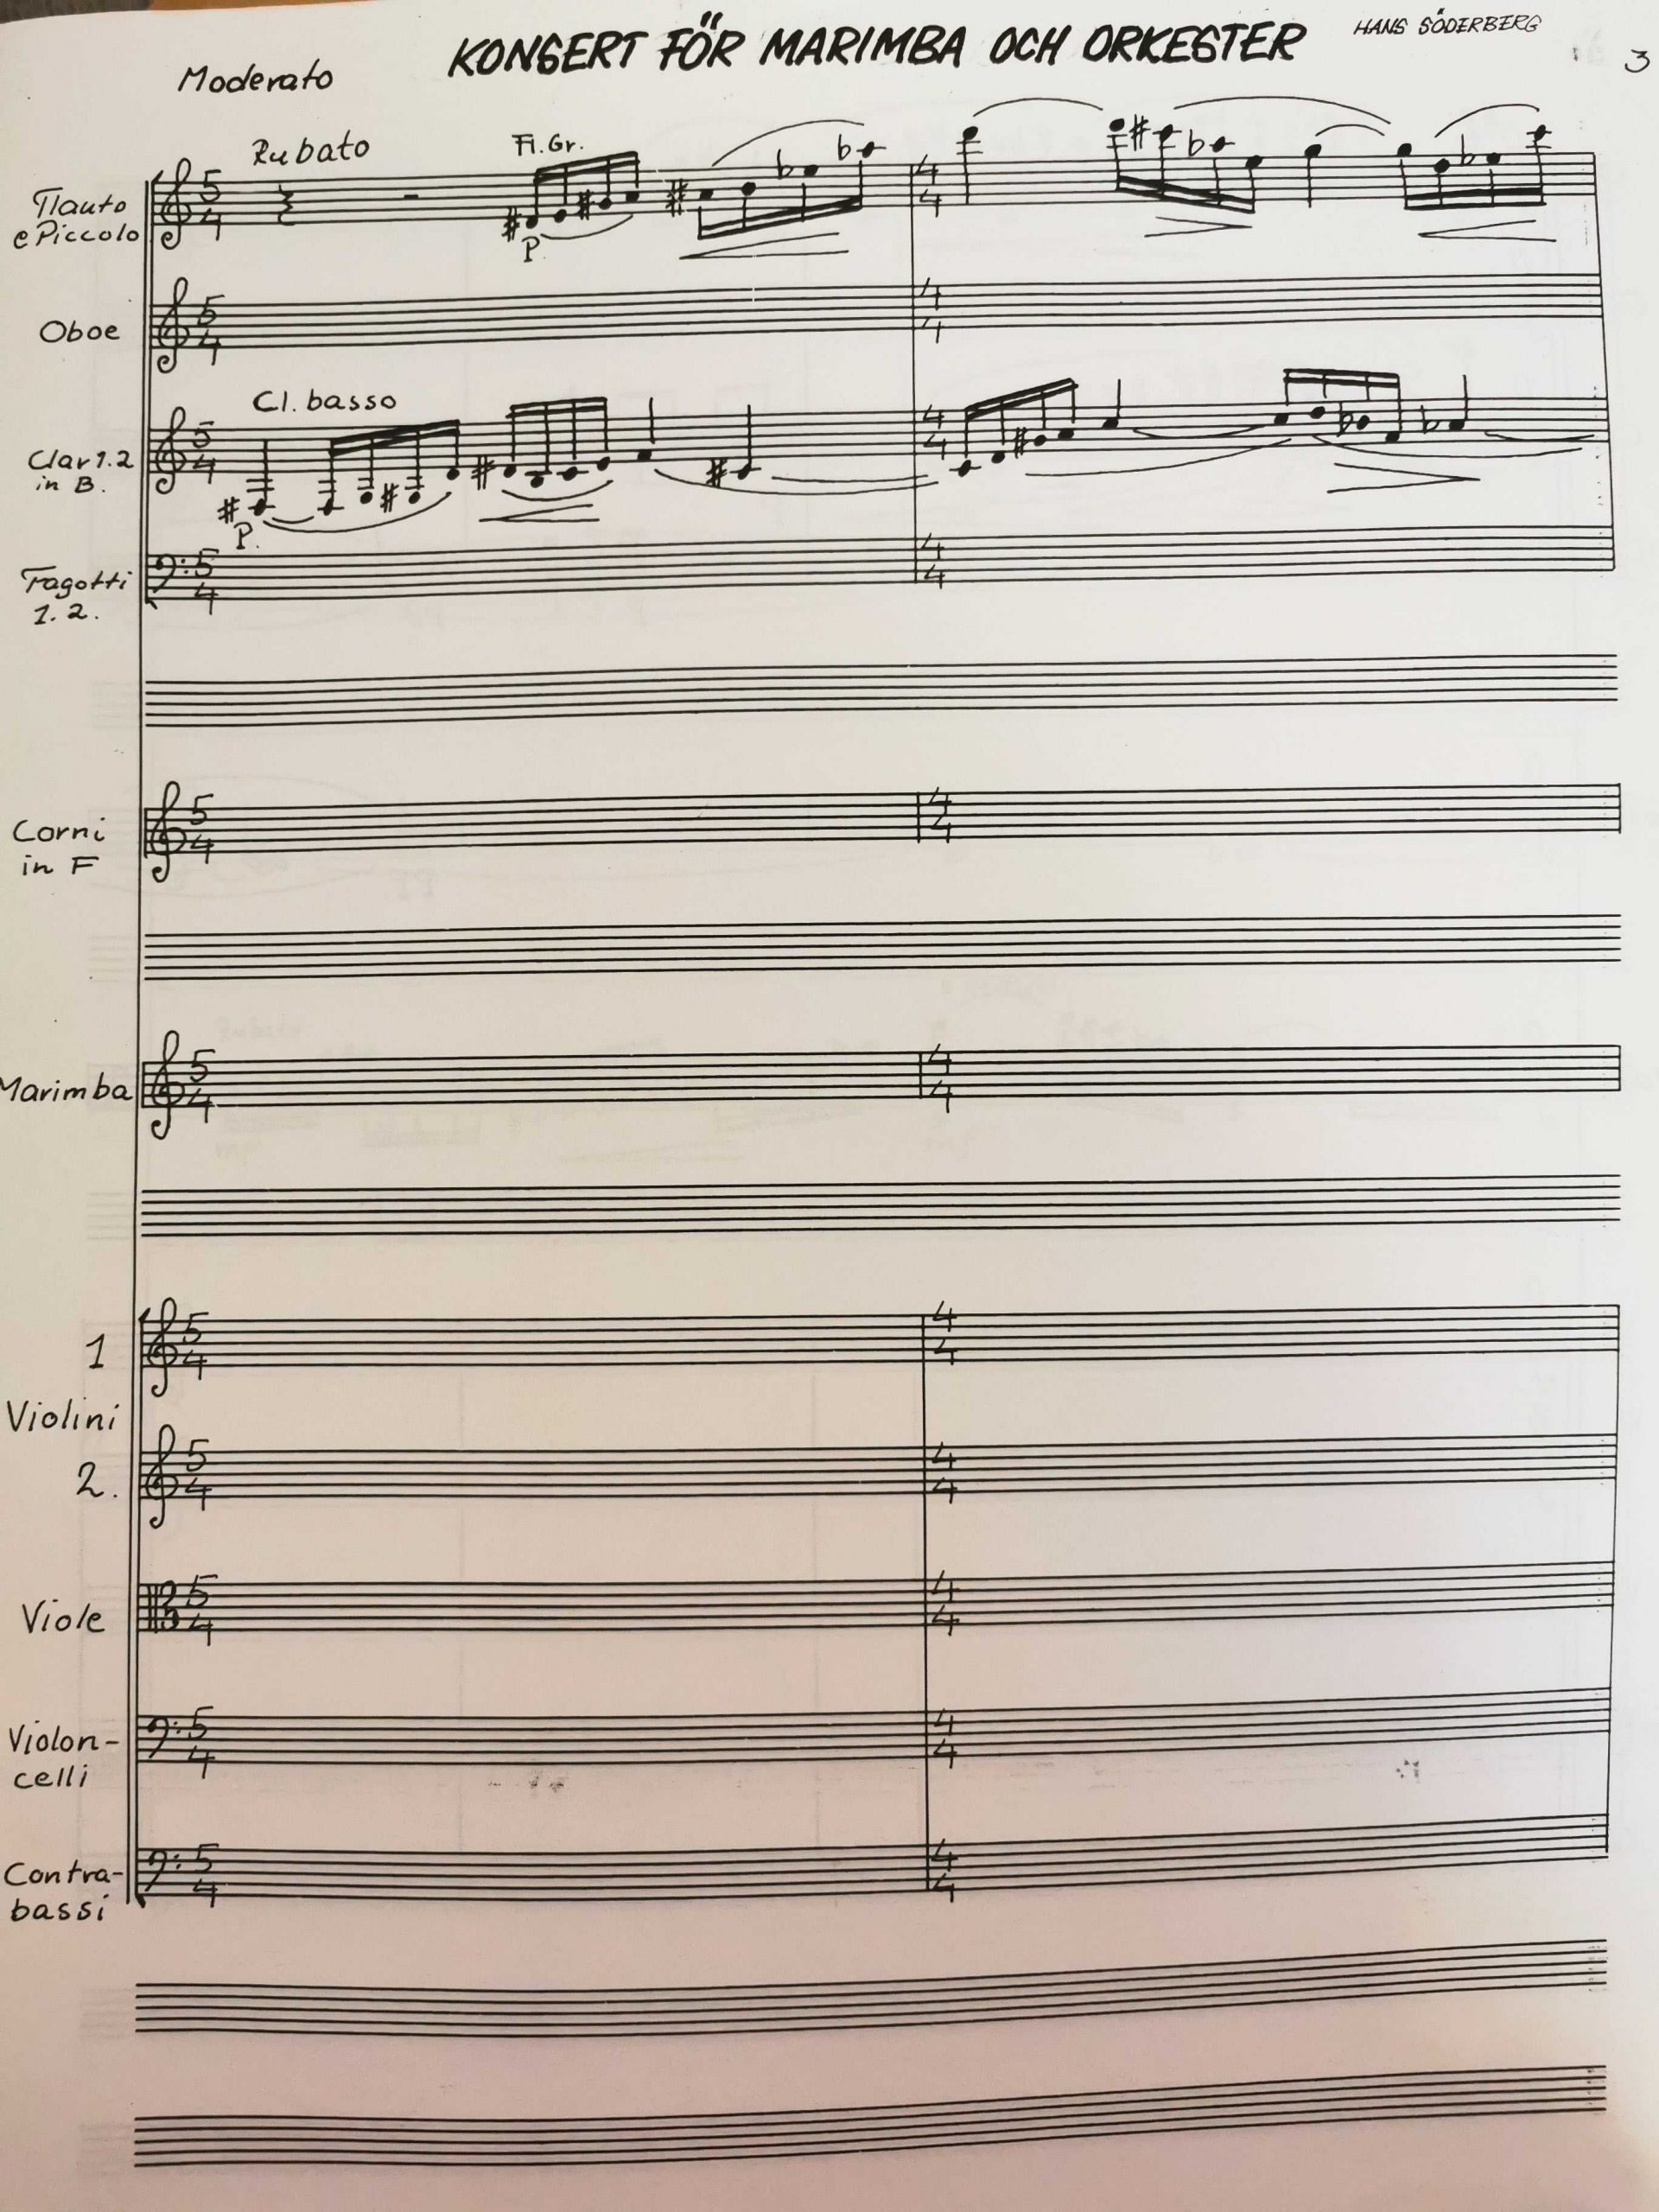 Concerto for Marimba and Orchestra (Score Only) by Hans Soderberg